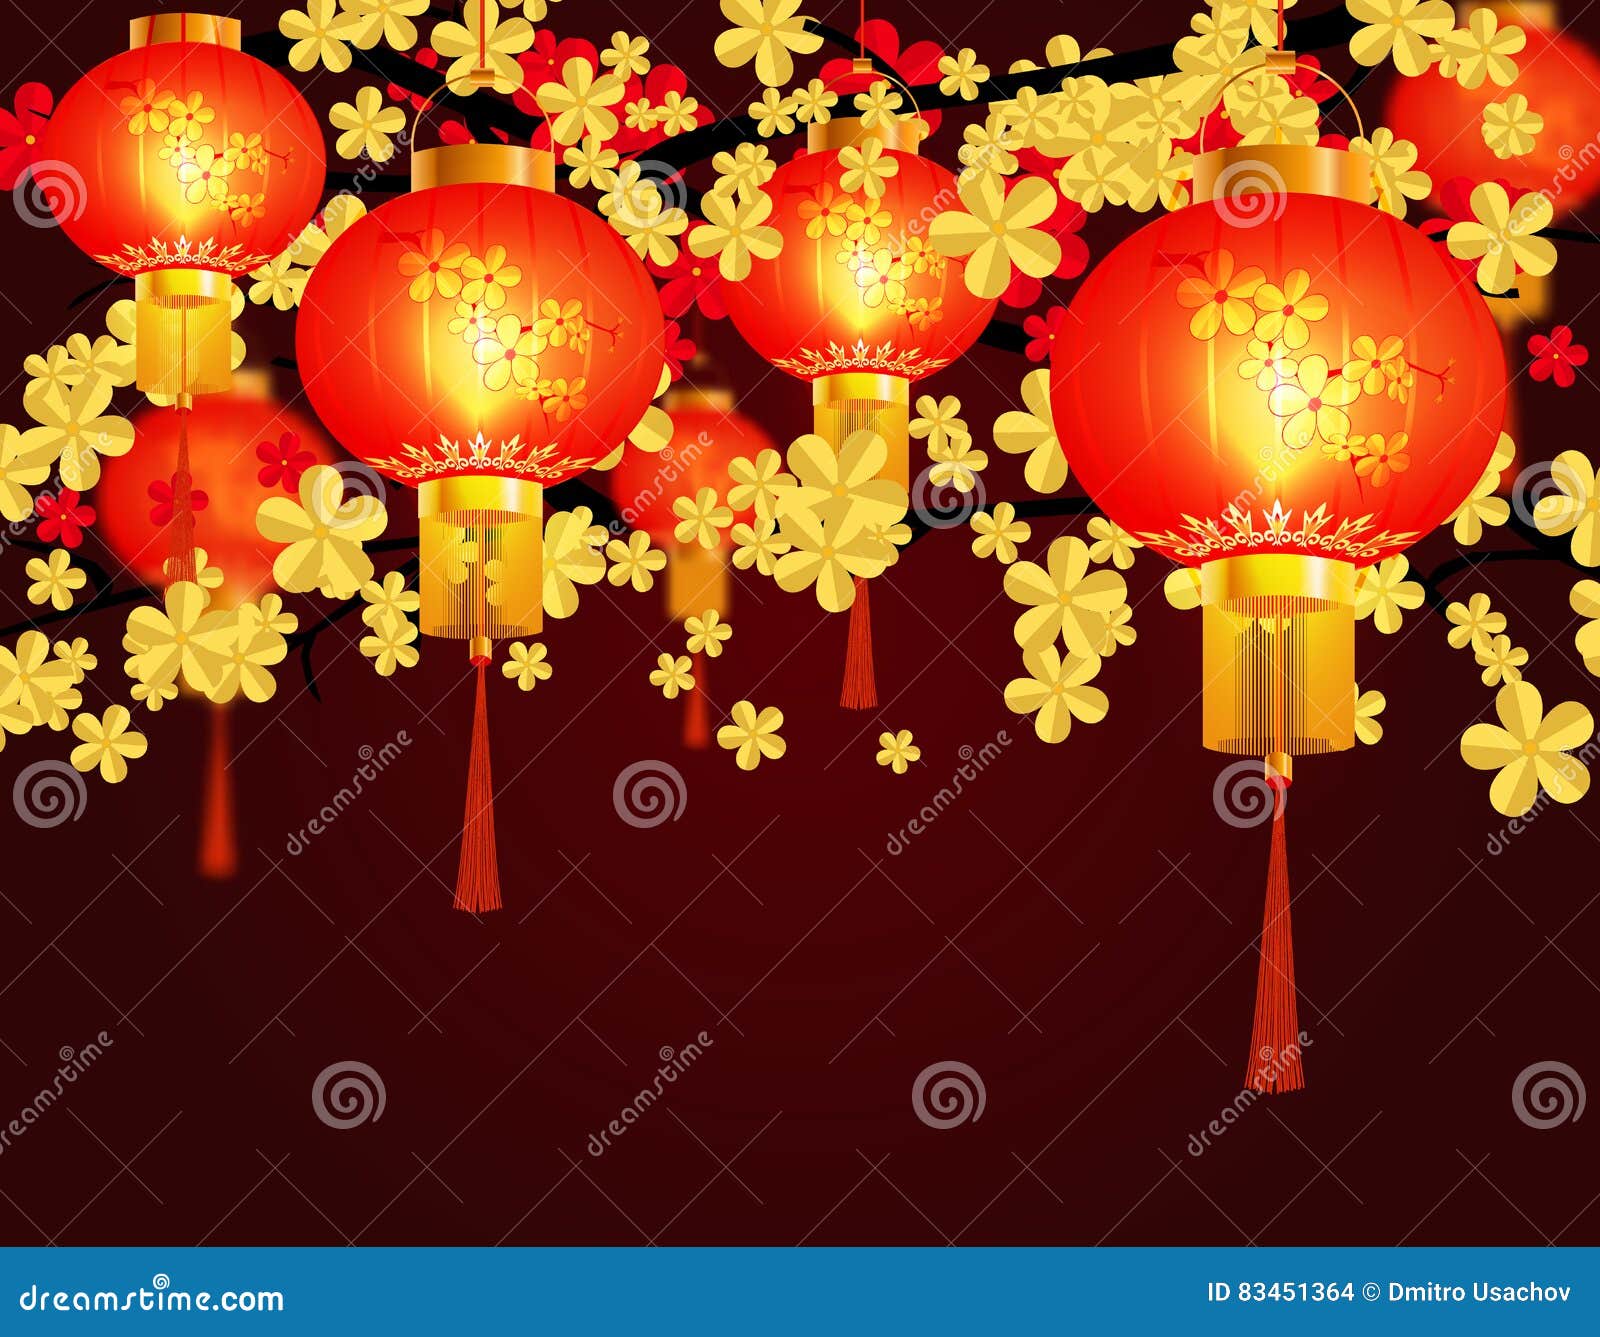 Chinese red lantern with gold stripes isolated on white background